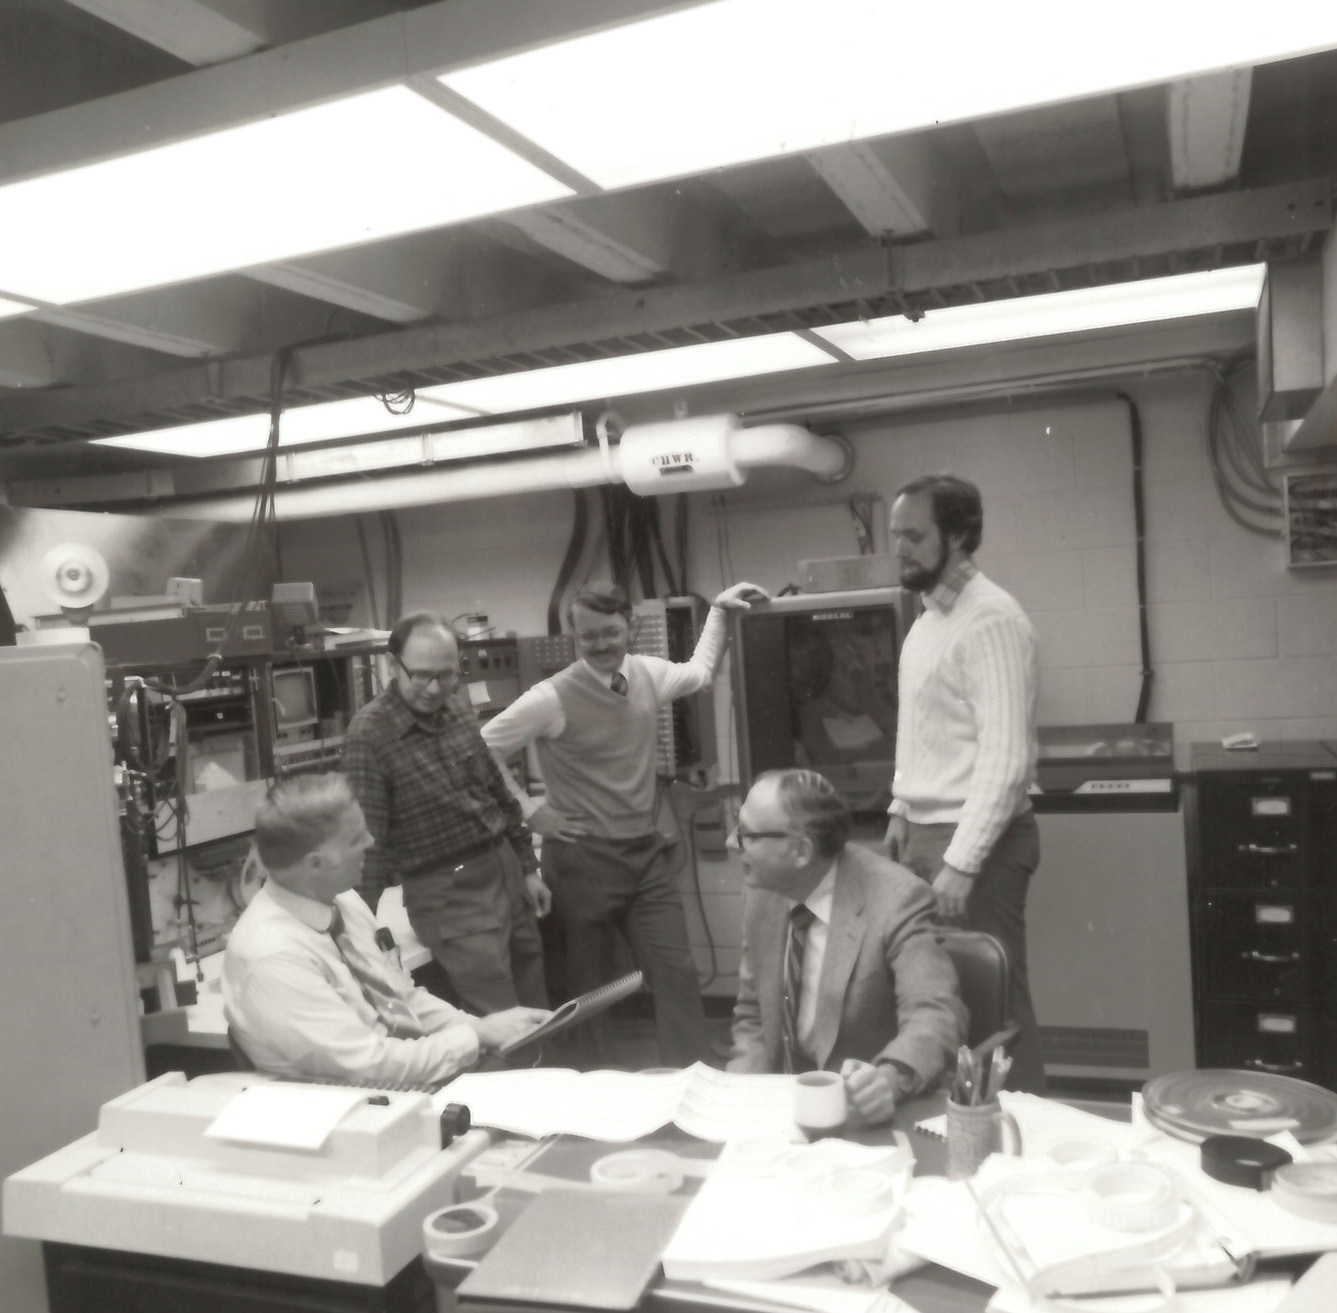 Senior staff reviewing study results, 1980